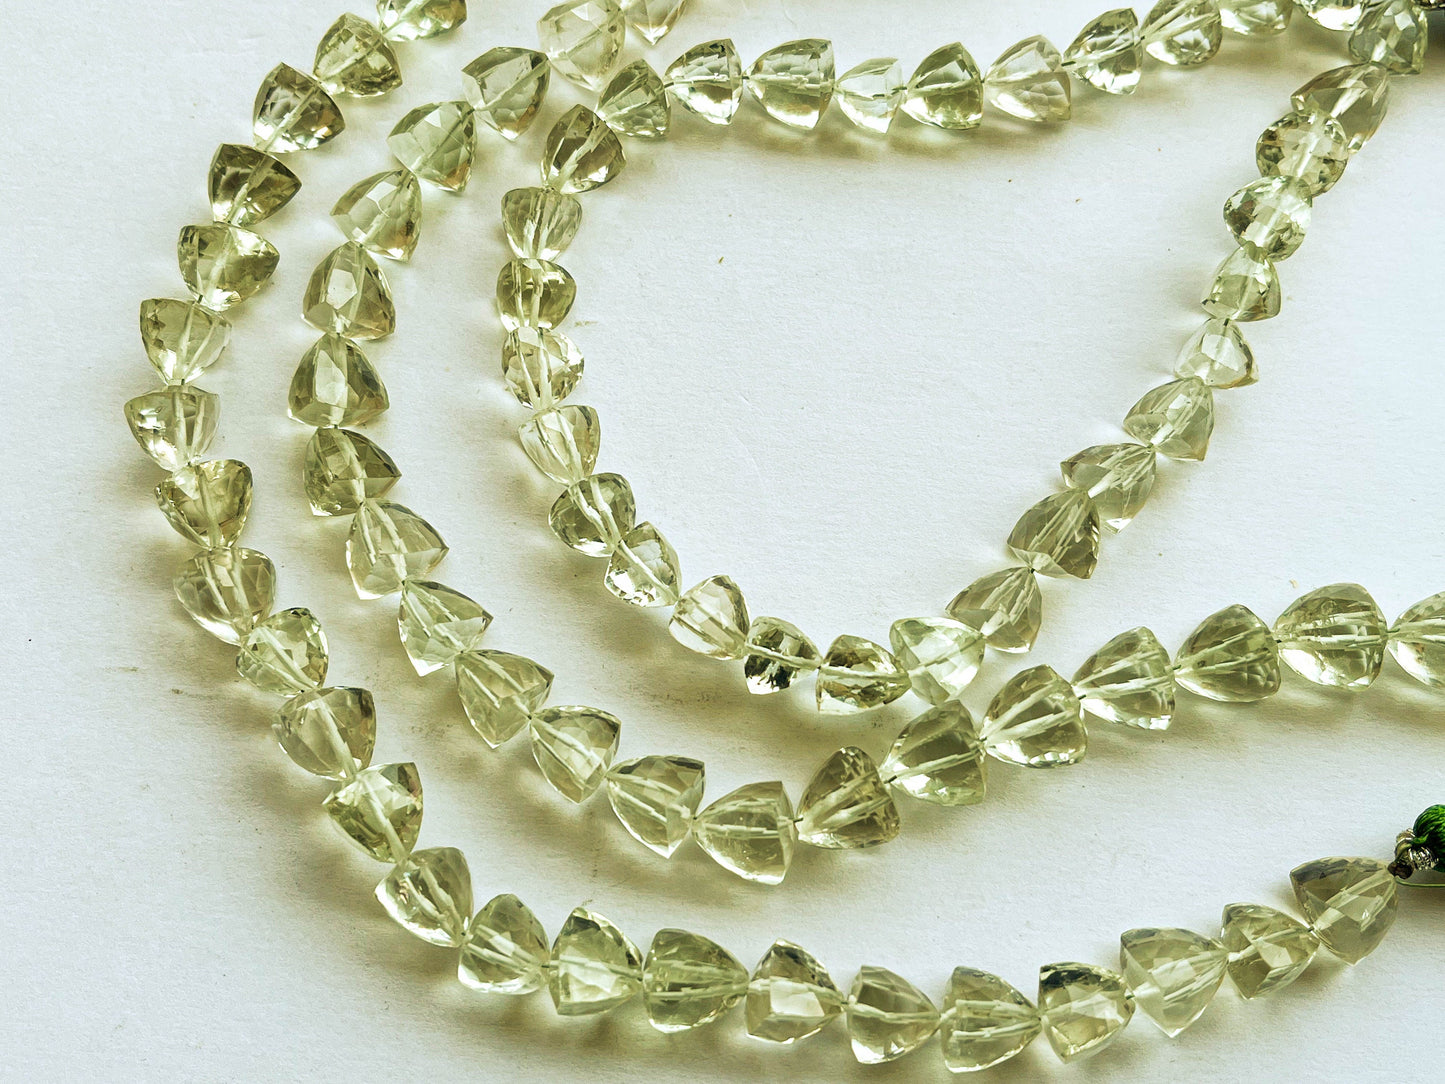 Green Amethyst 3D Pyramid Shape Faceted Briolette Beads, Center Drill, Natural Gemstone Beads, 8mm to 9mm, 27 Pieces String